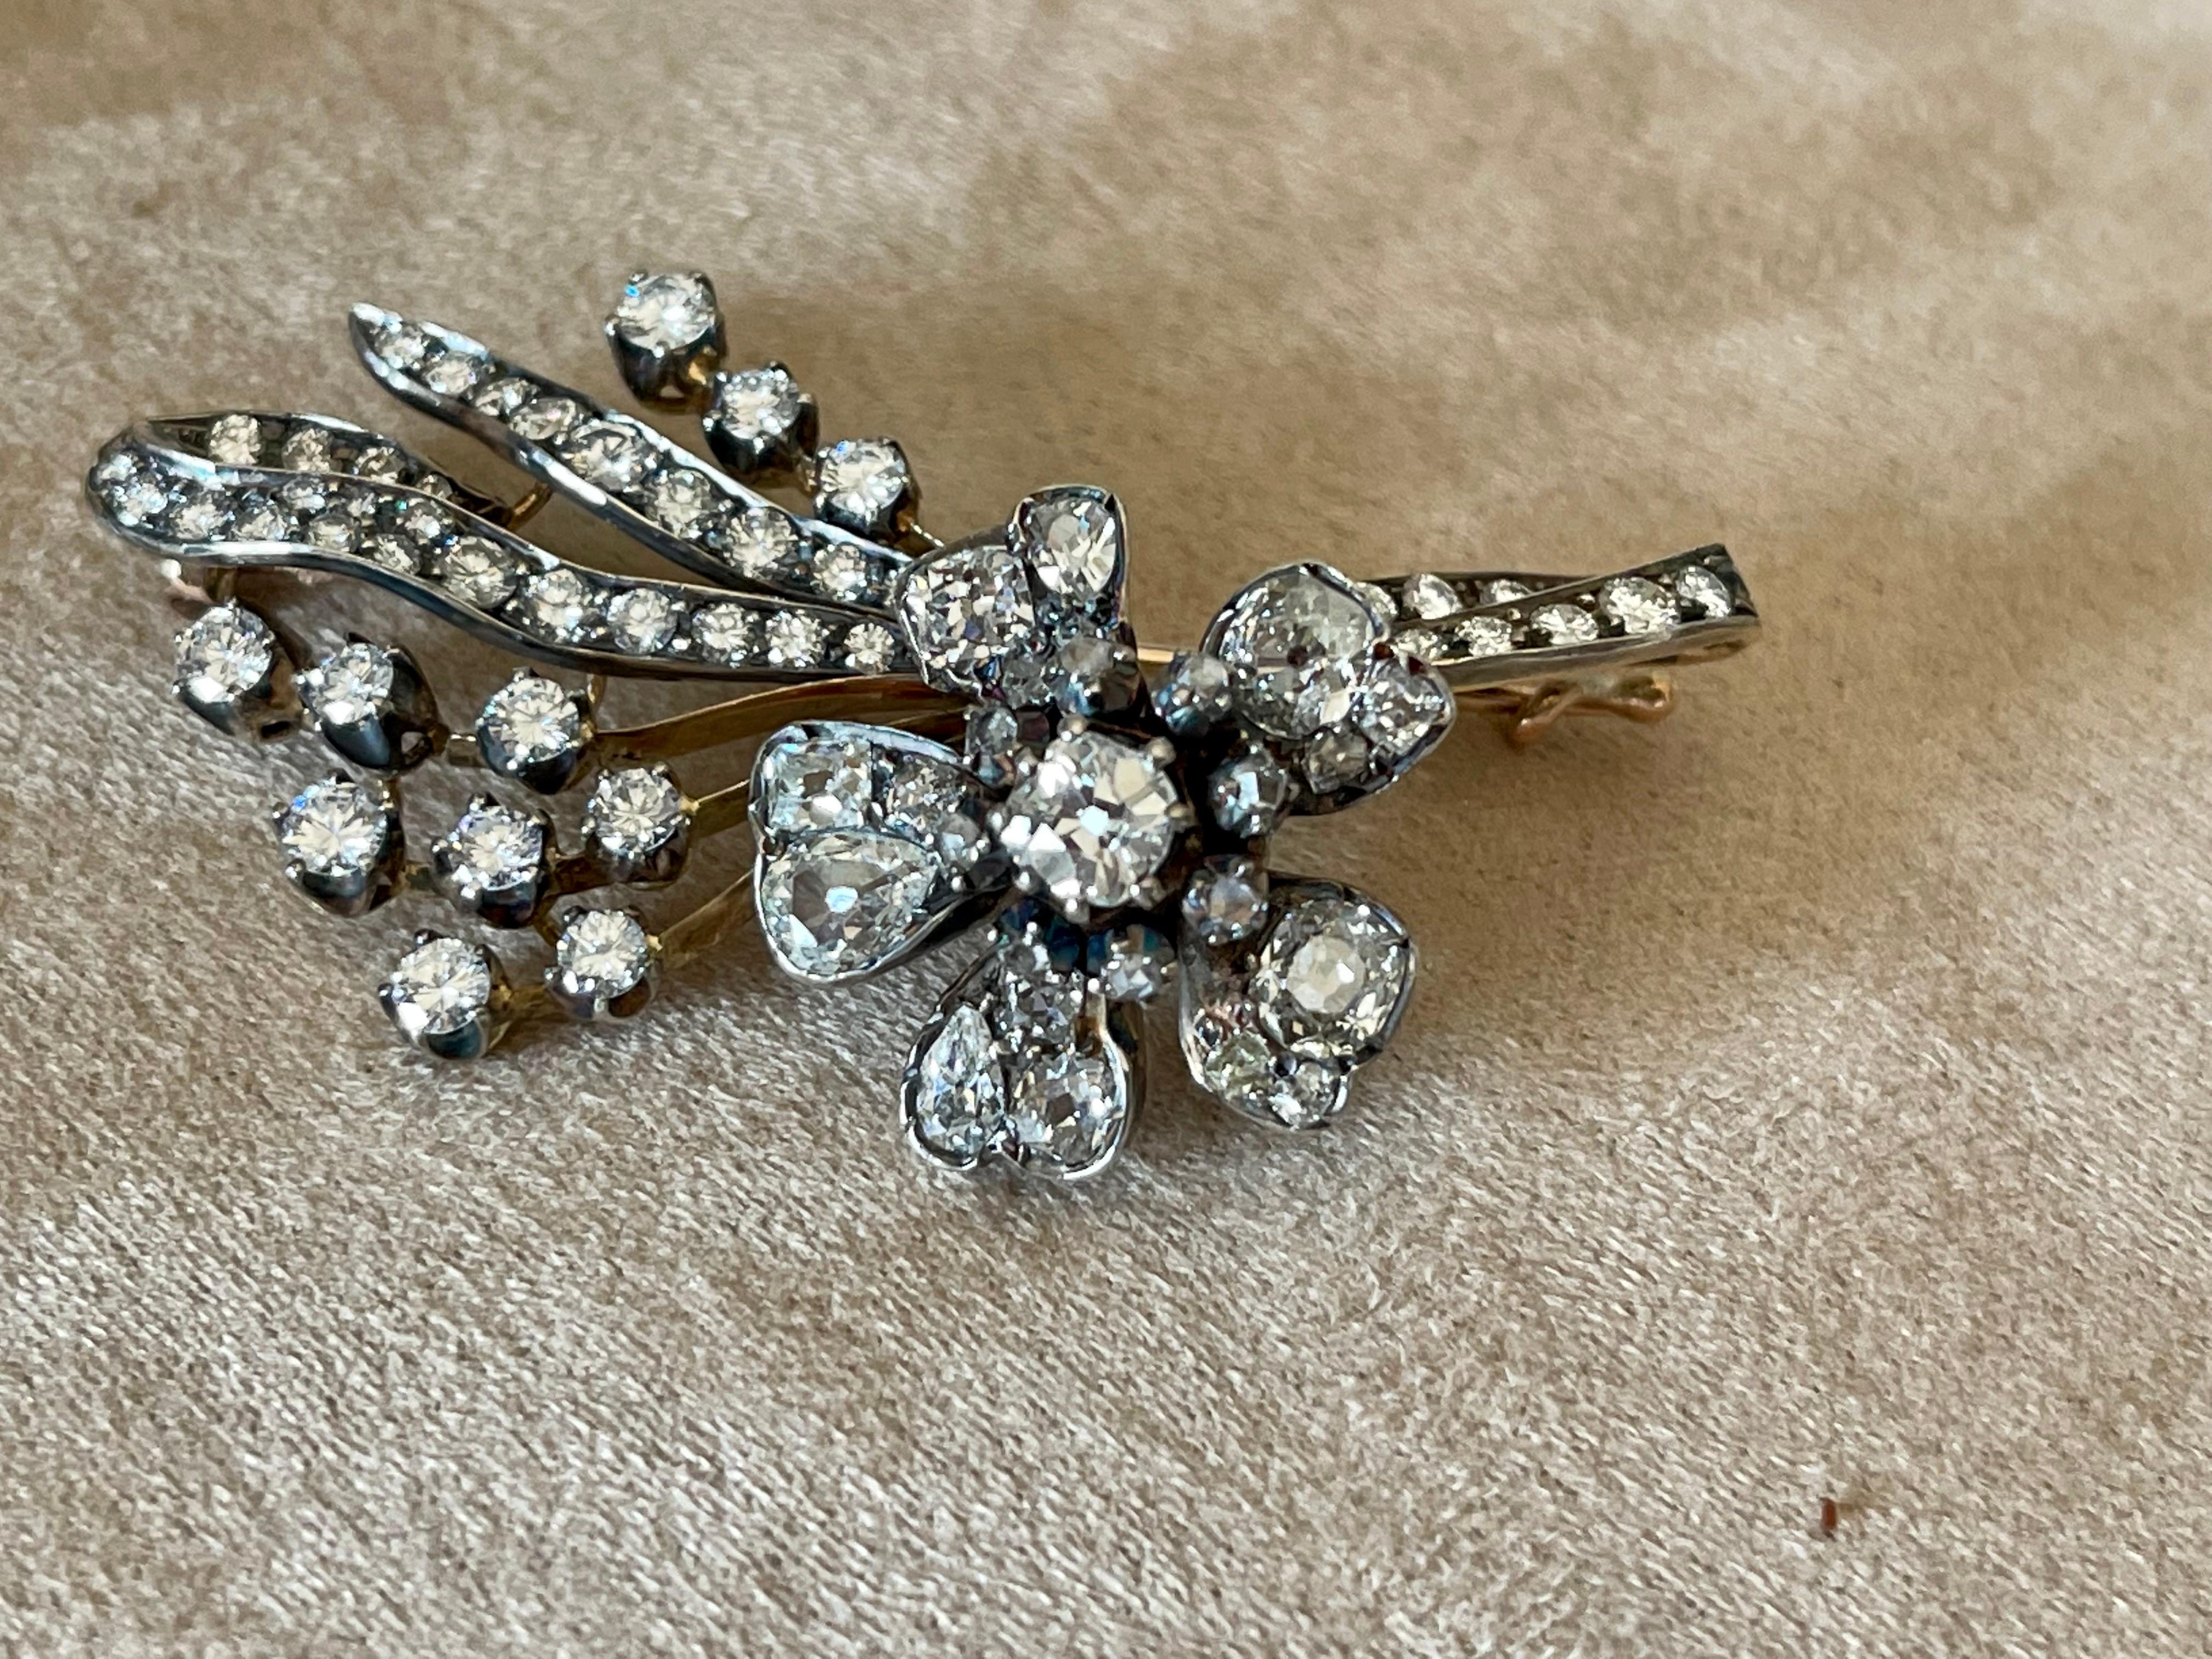 A Victorian diamond spray brooch, the flower-head centrally-set with an old-cut diamond estimated to weigh 0.50 carats, each petal pave-set with old mine-cut diamonds, set amongst diamond-set foliate decorations, the diamonds estimated to weigh